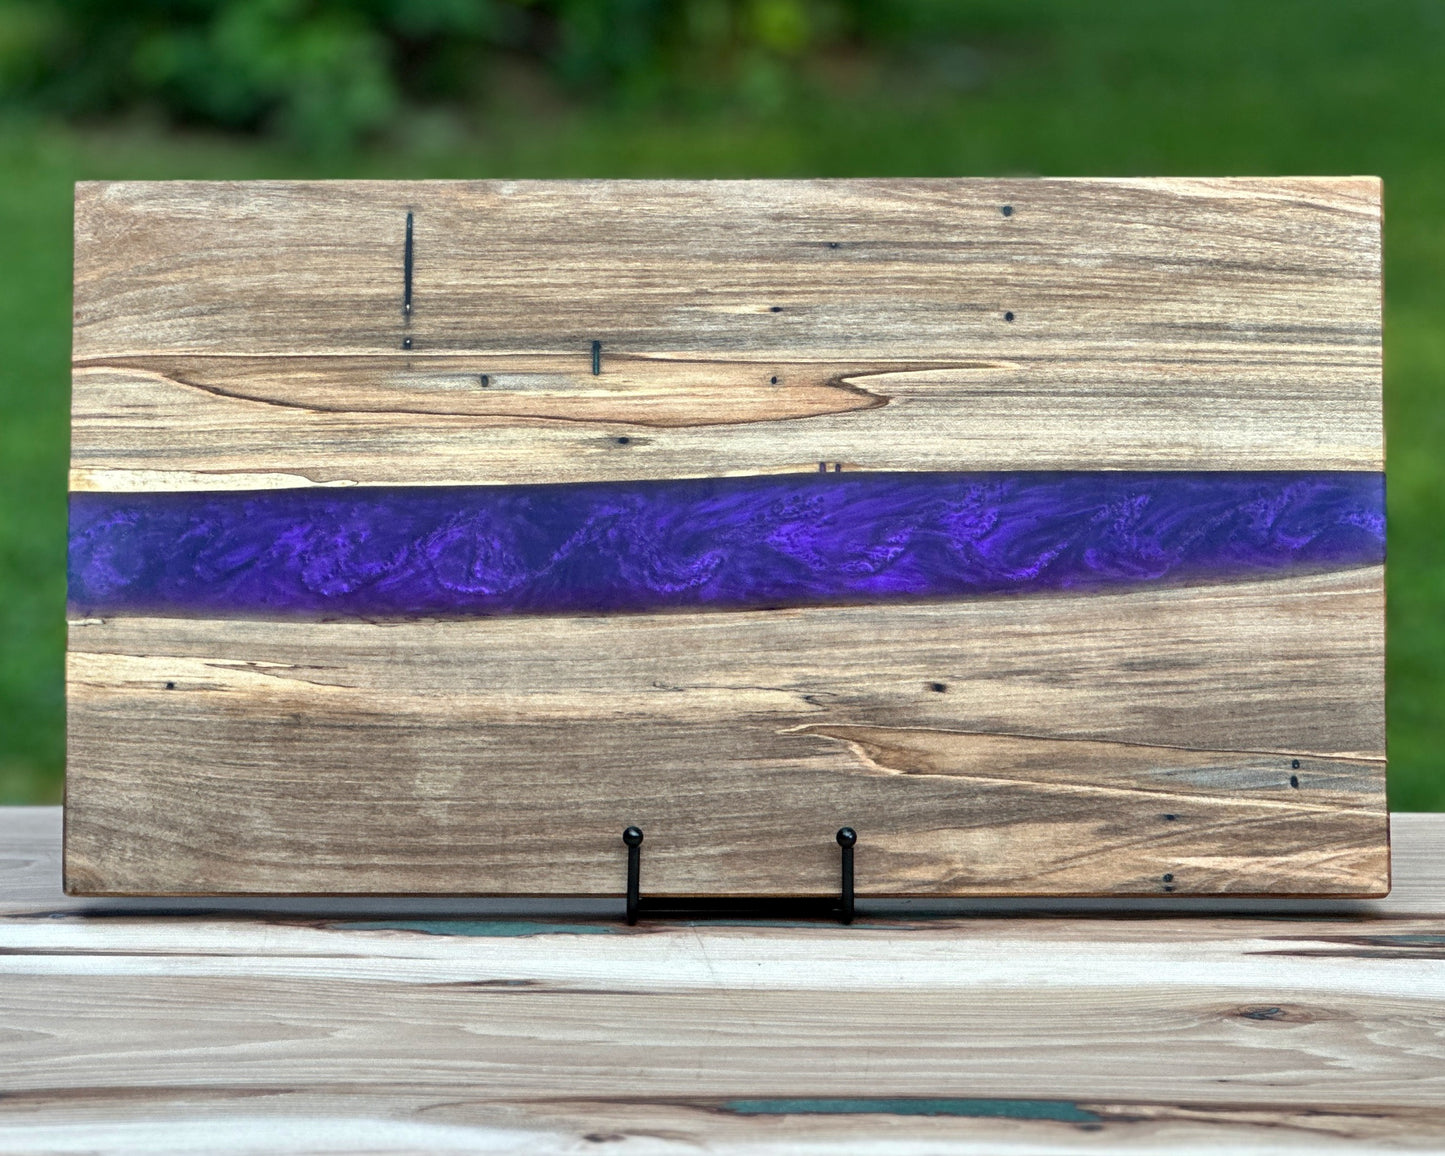 Spalted Maple Wood and Deep Purple Epoxy Cutting Board